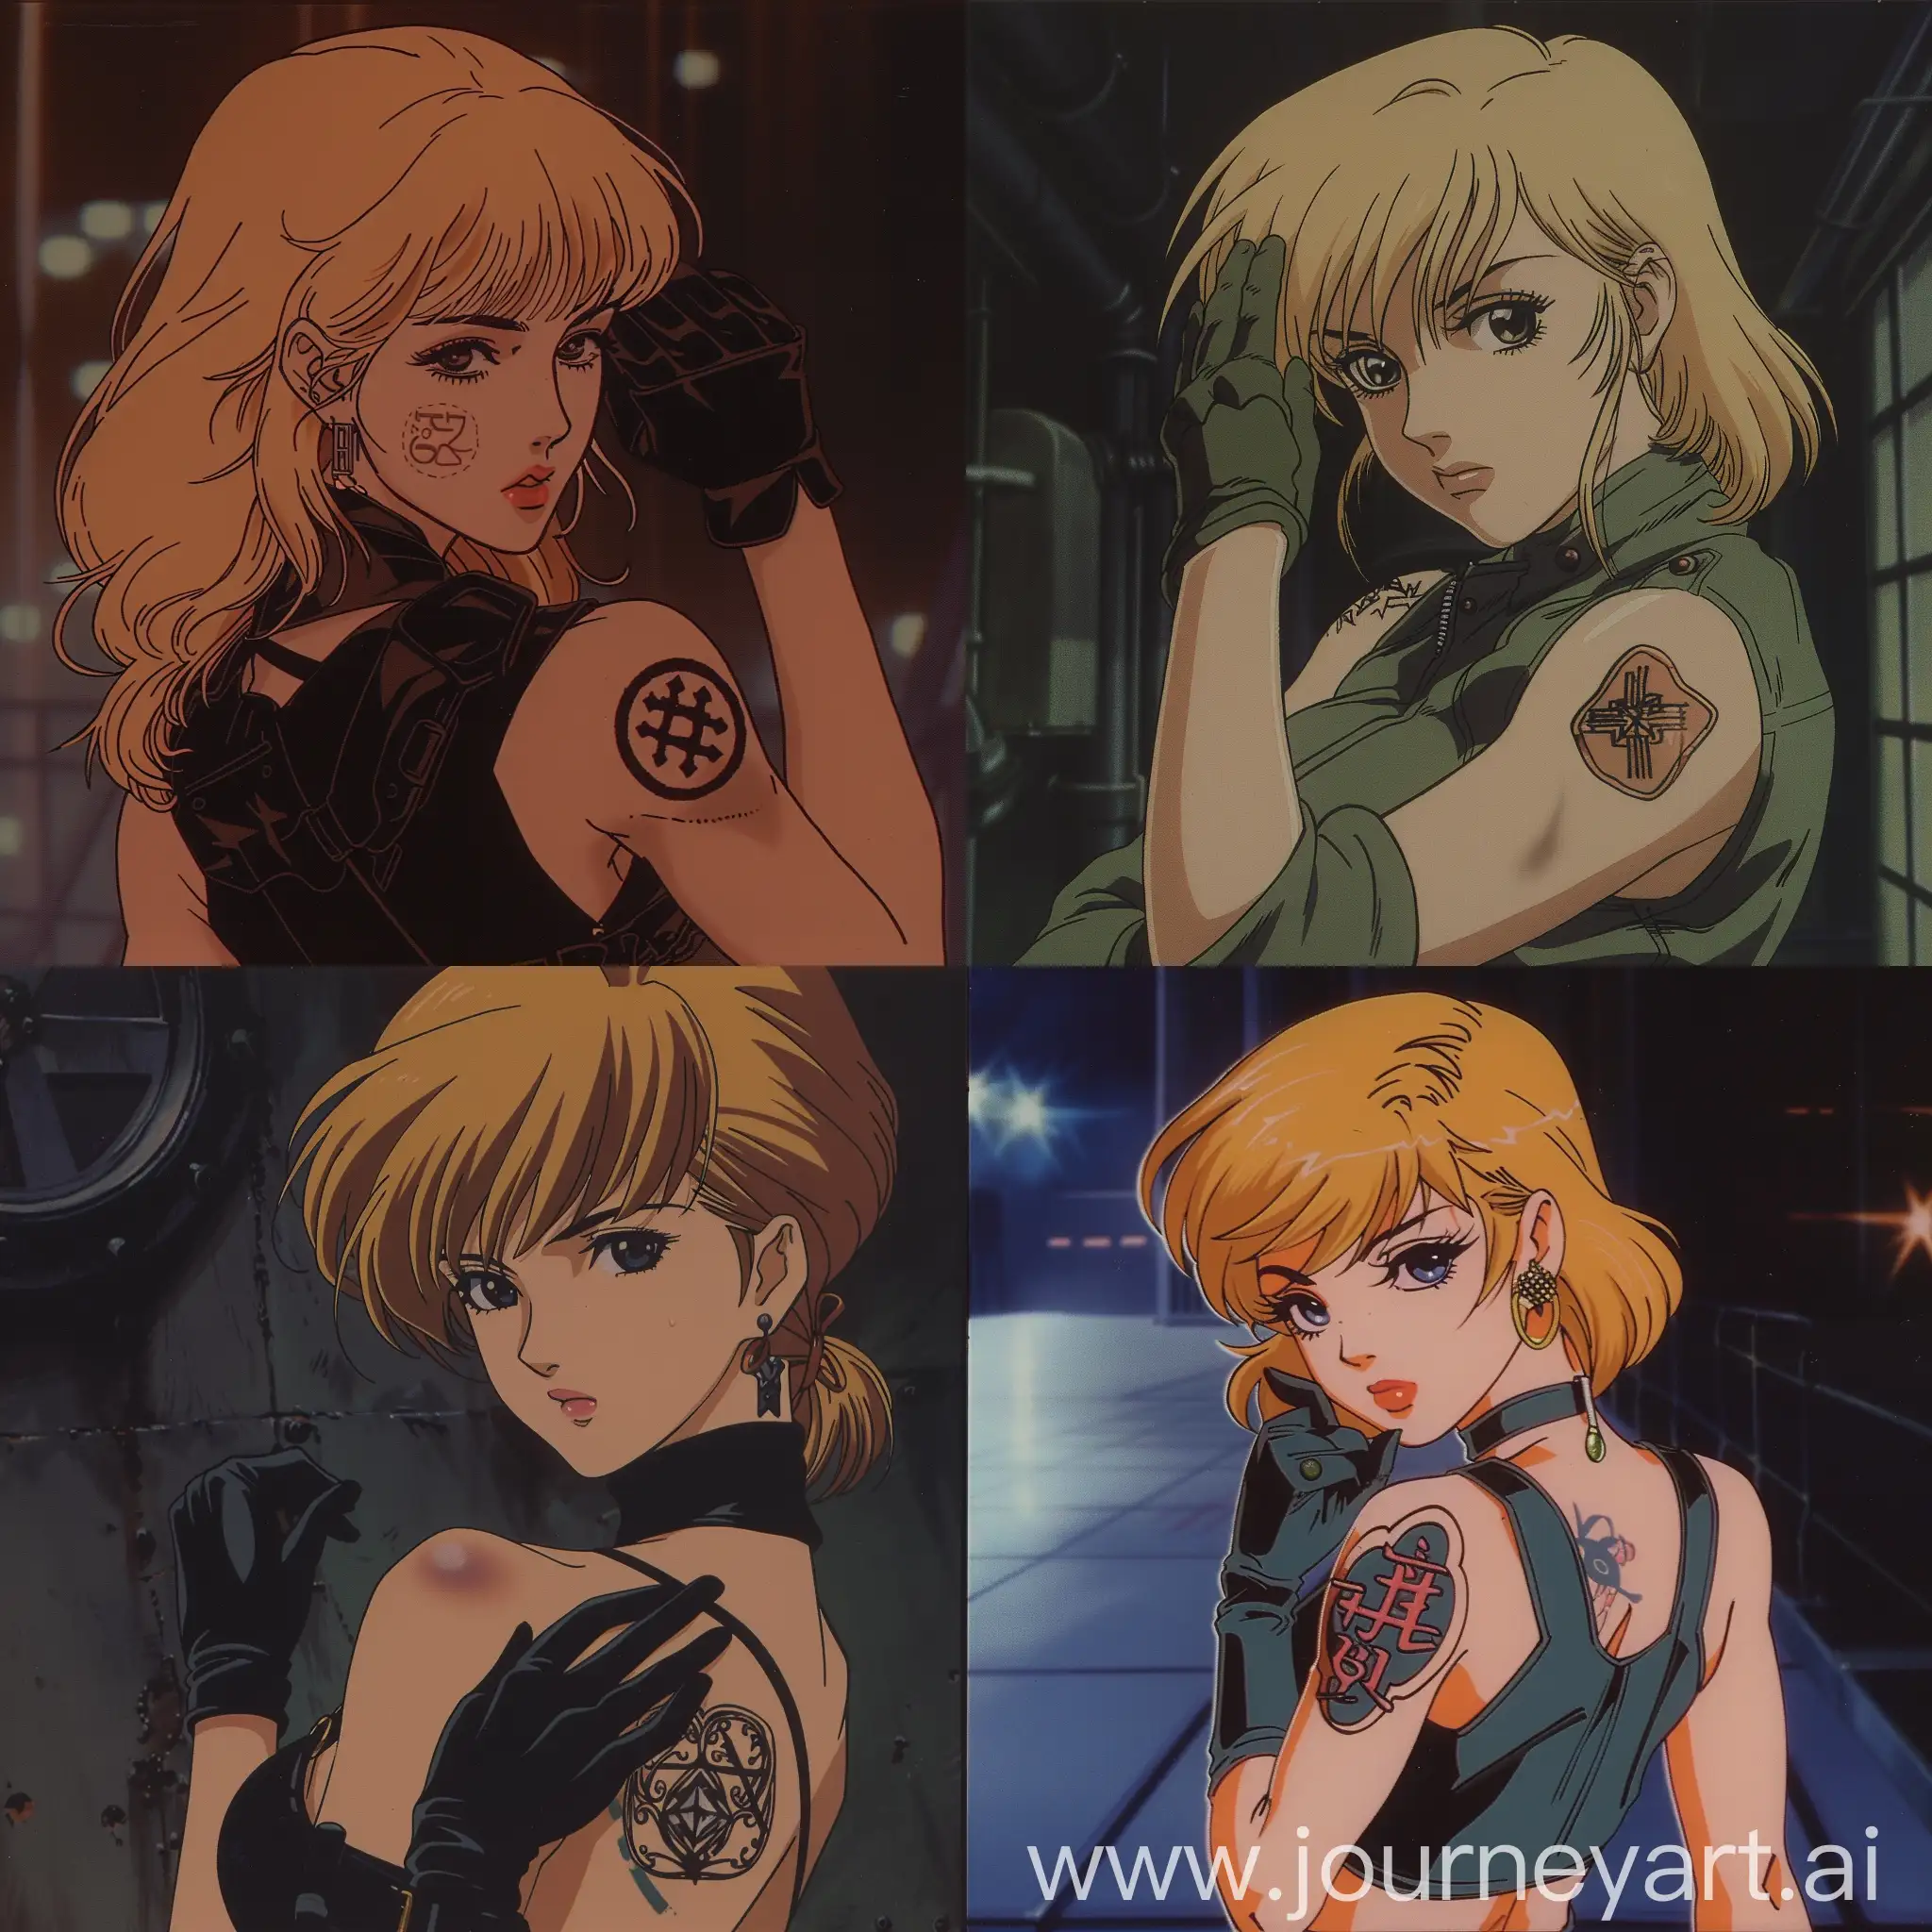 Blonde-Anime-Girl-with-Japanese-Symbol-Tattoo-in-90s-Retro-Style